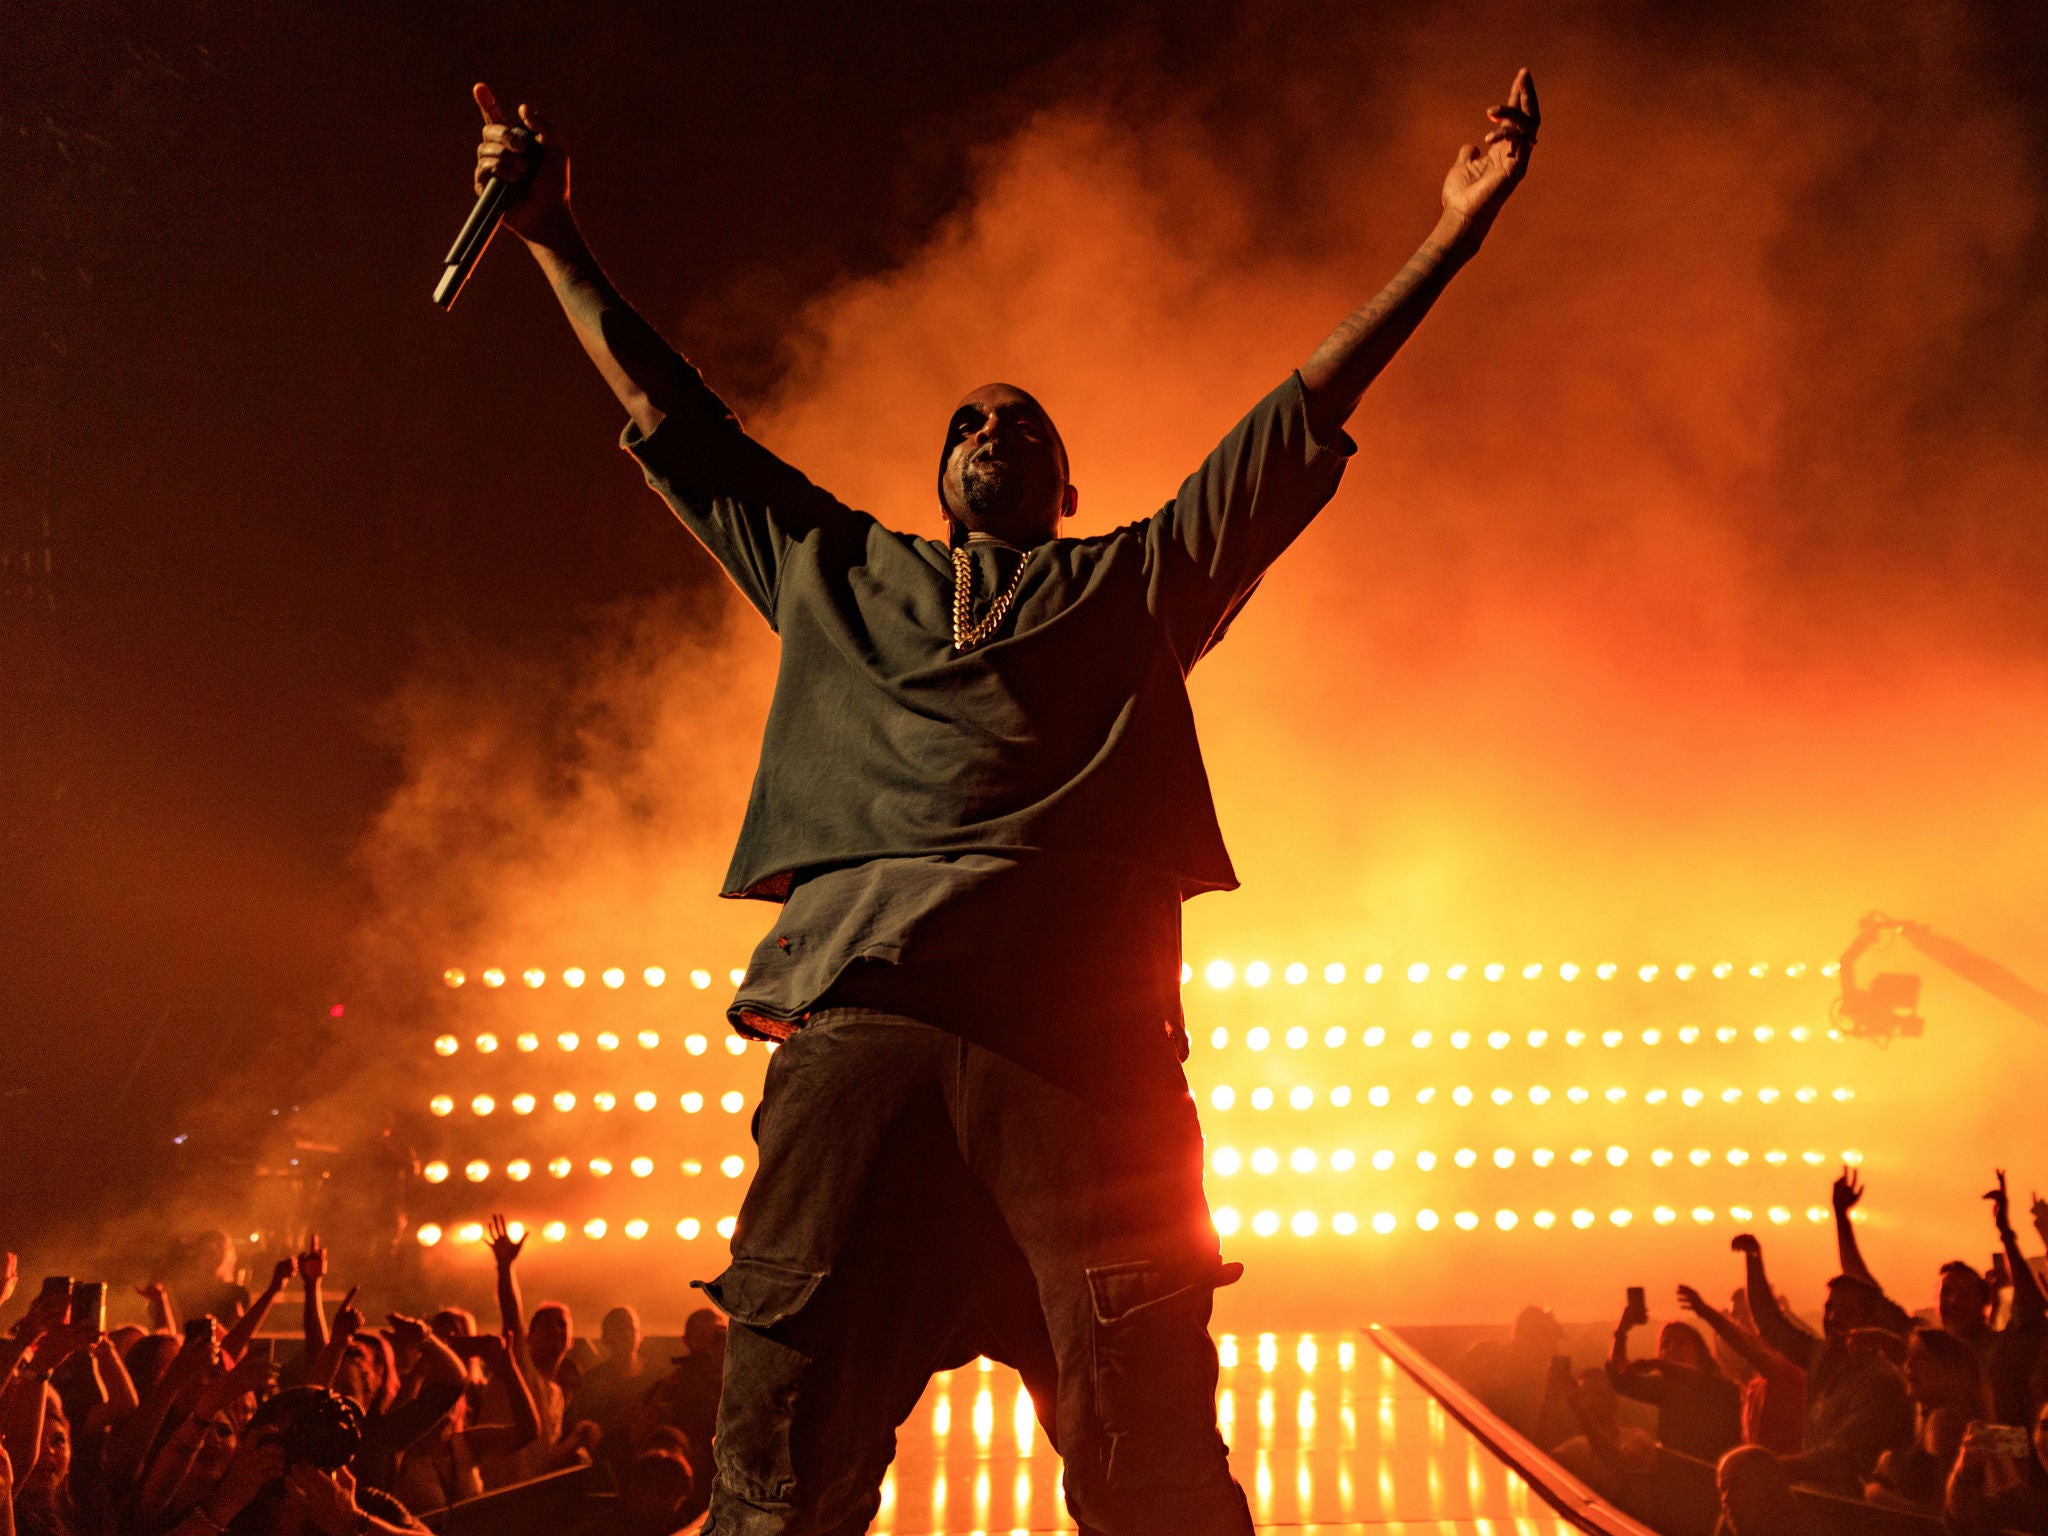 Kanye West has expressed his desire to take over the world many, many times